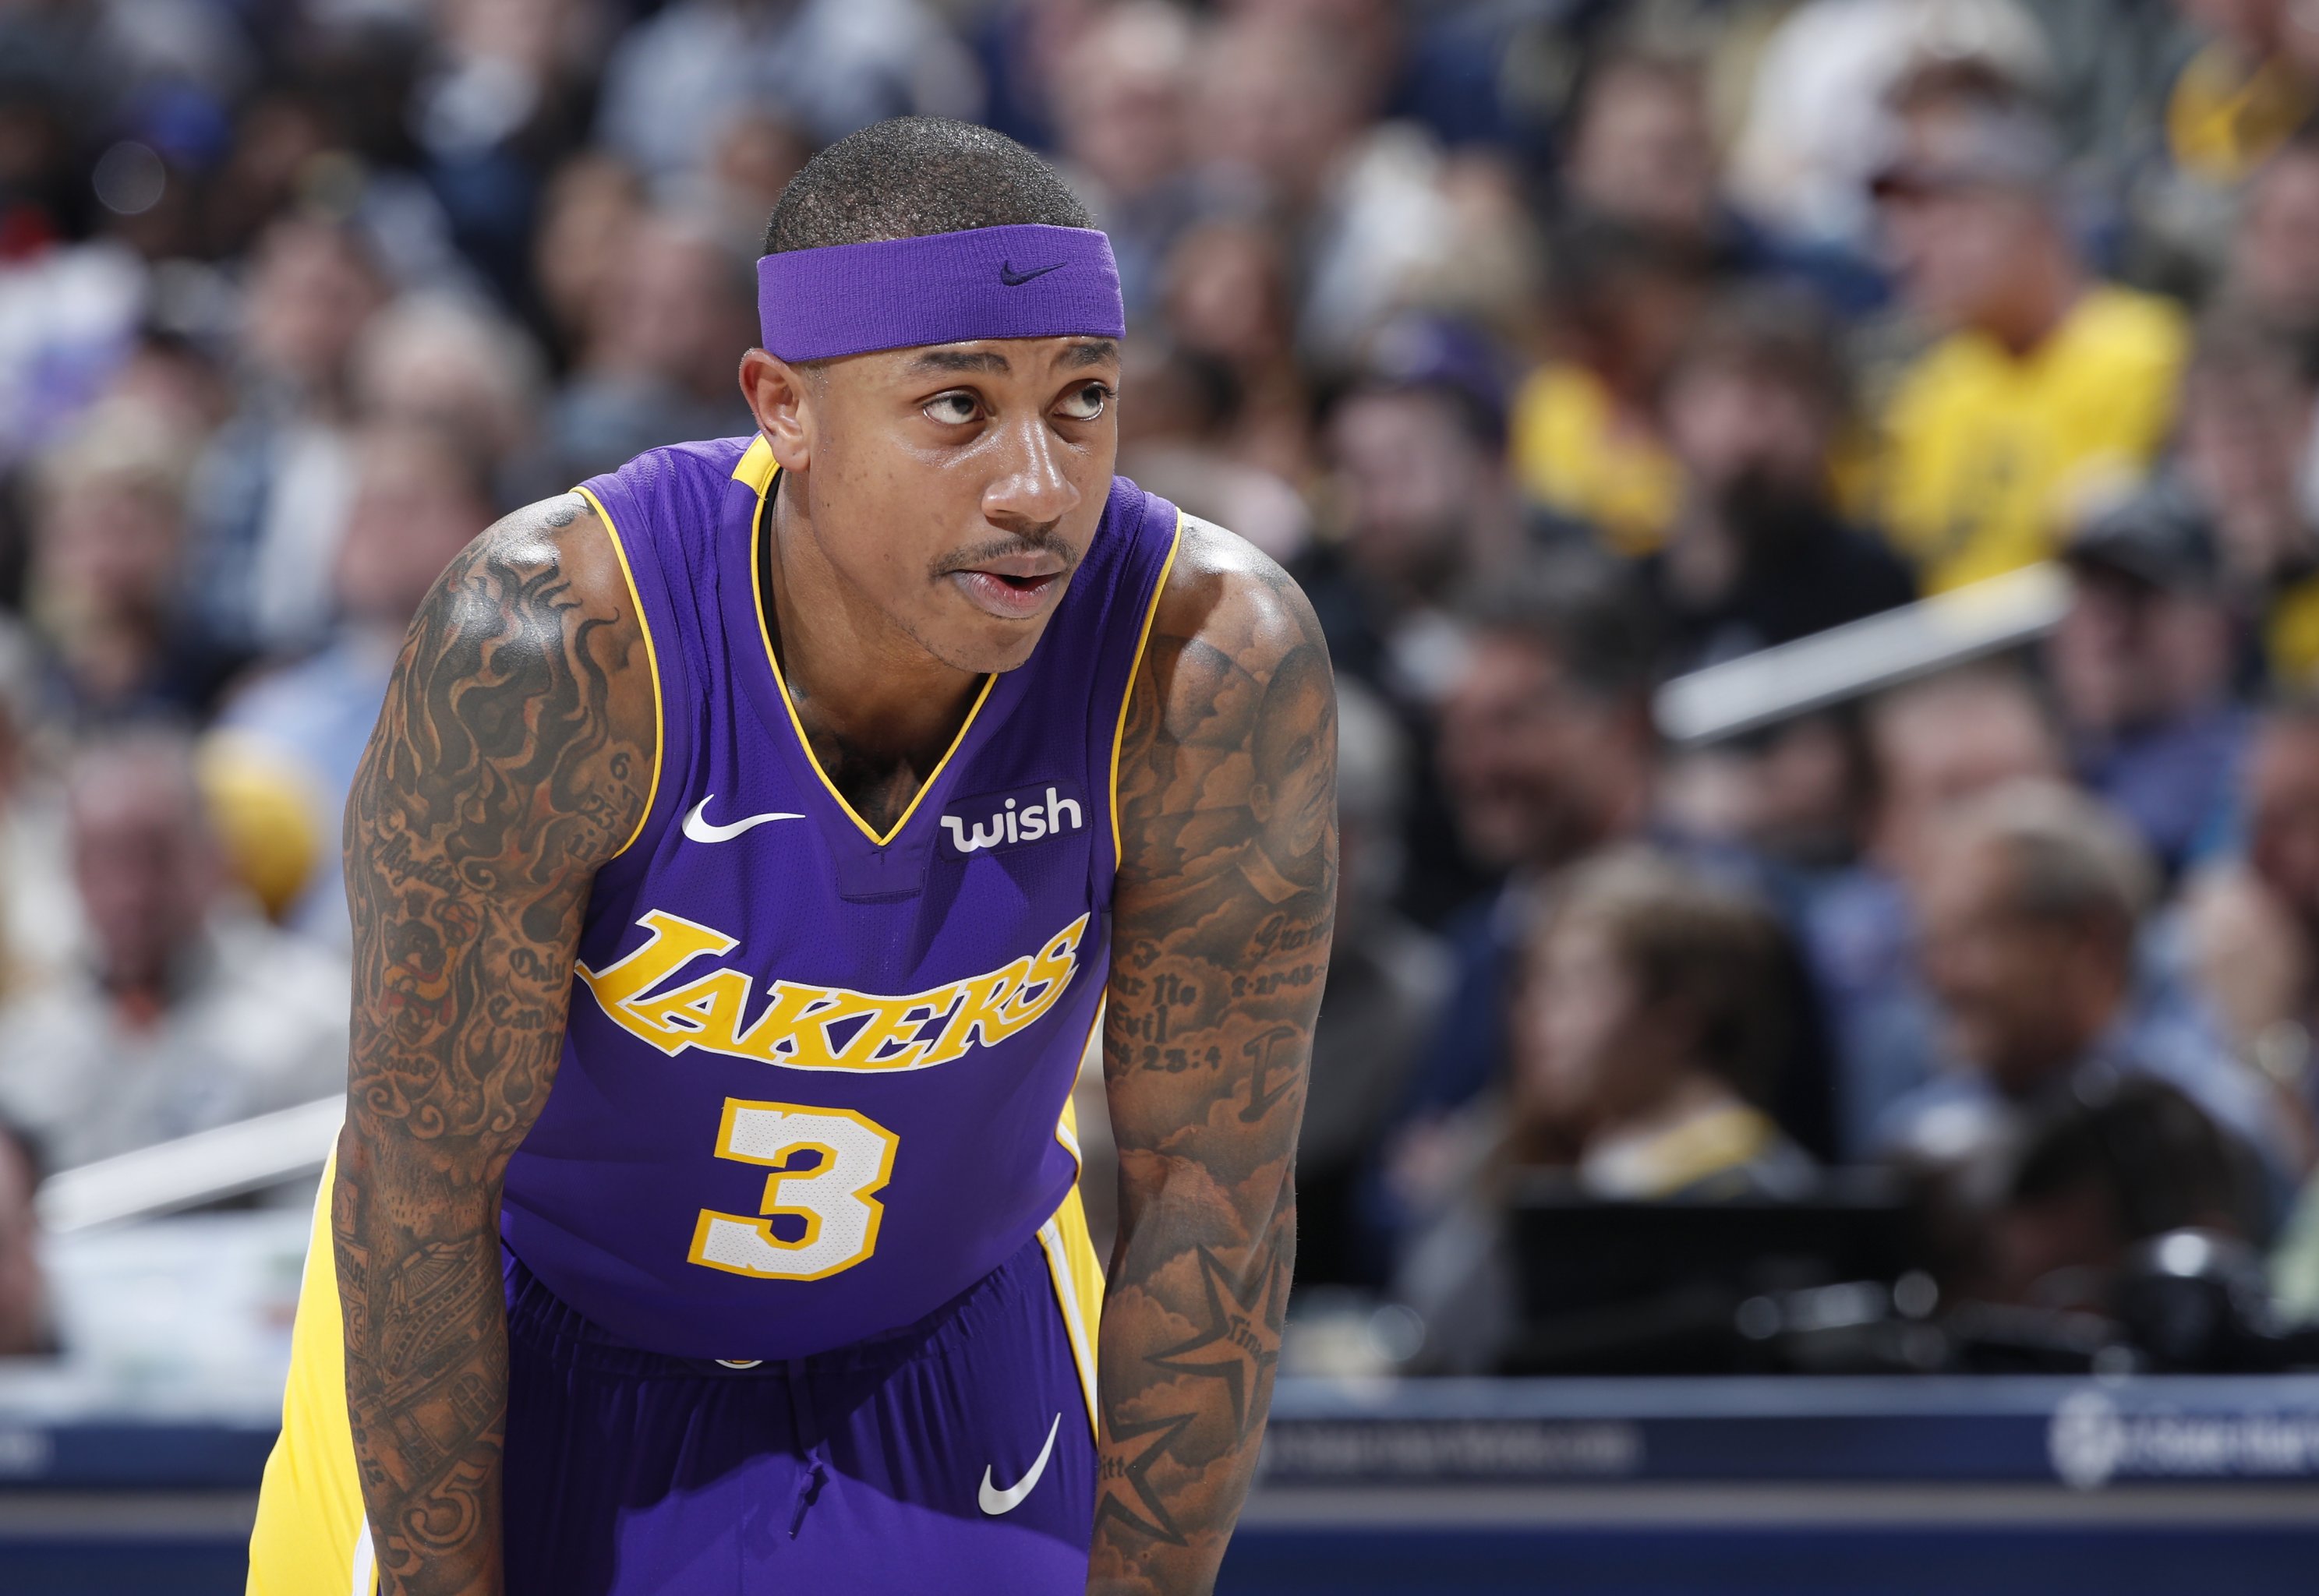 Isaiah Thomas Drawing Substantial Interest In Free Agency - Sonics Rising